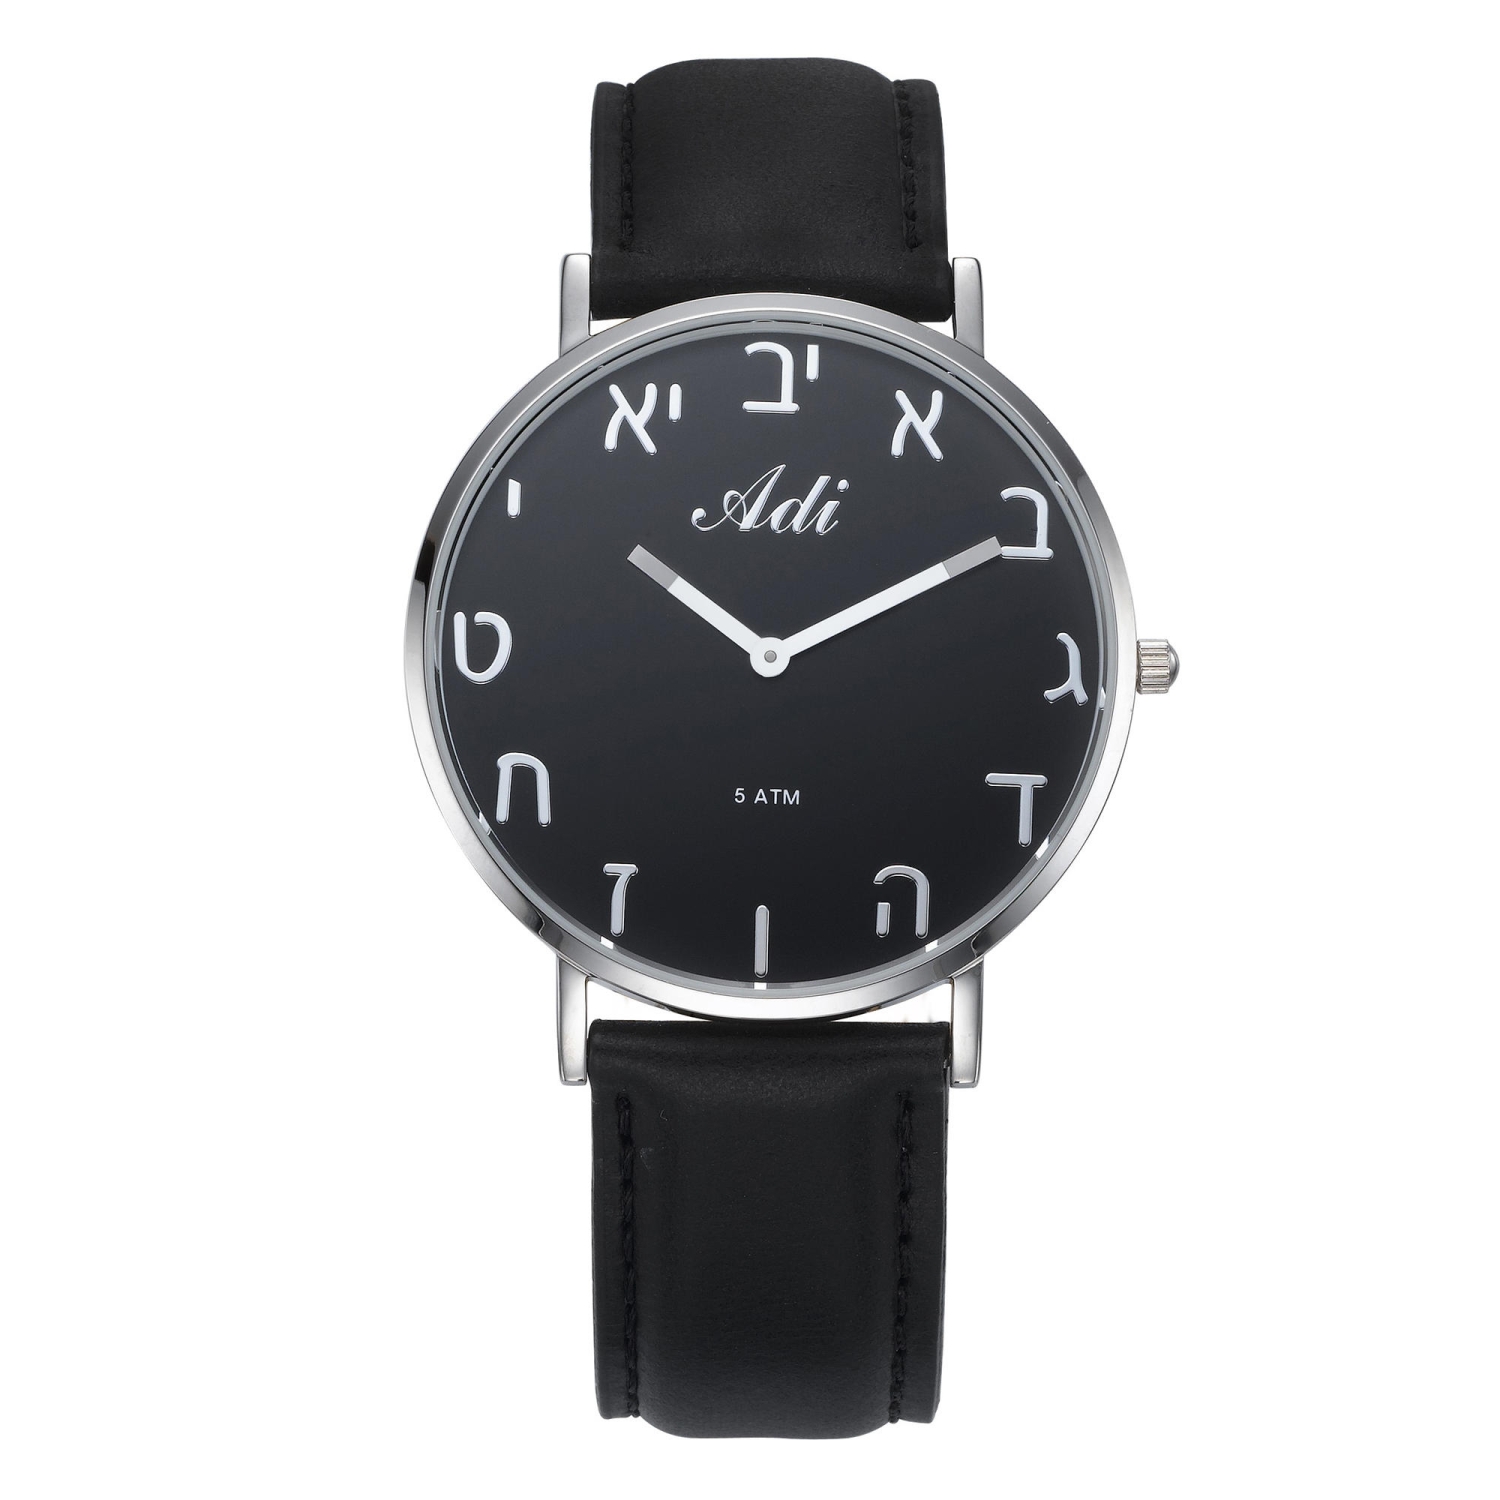 Adi Black Leather Aleph-Bet Watch - Black and Silver Face - 1